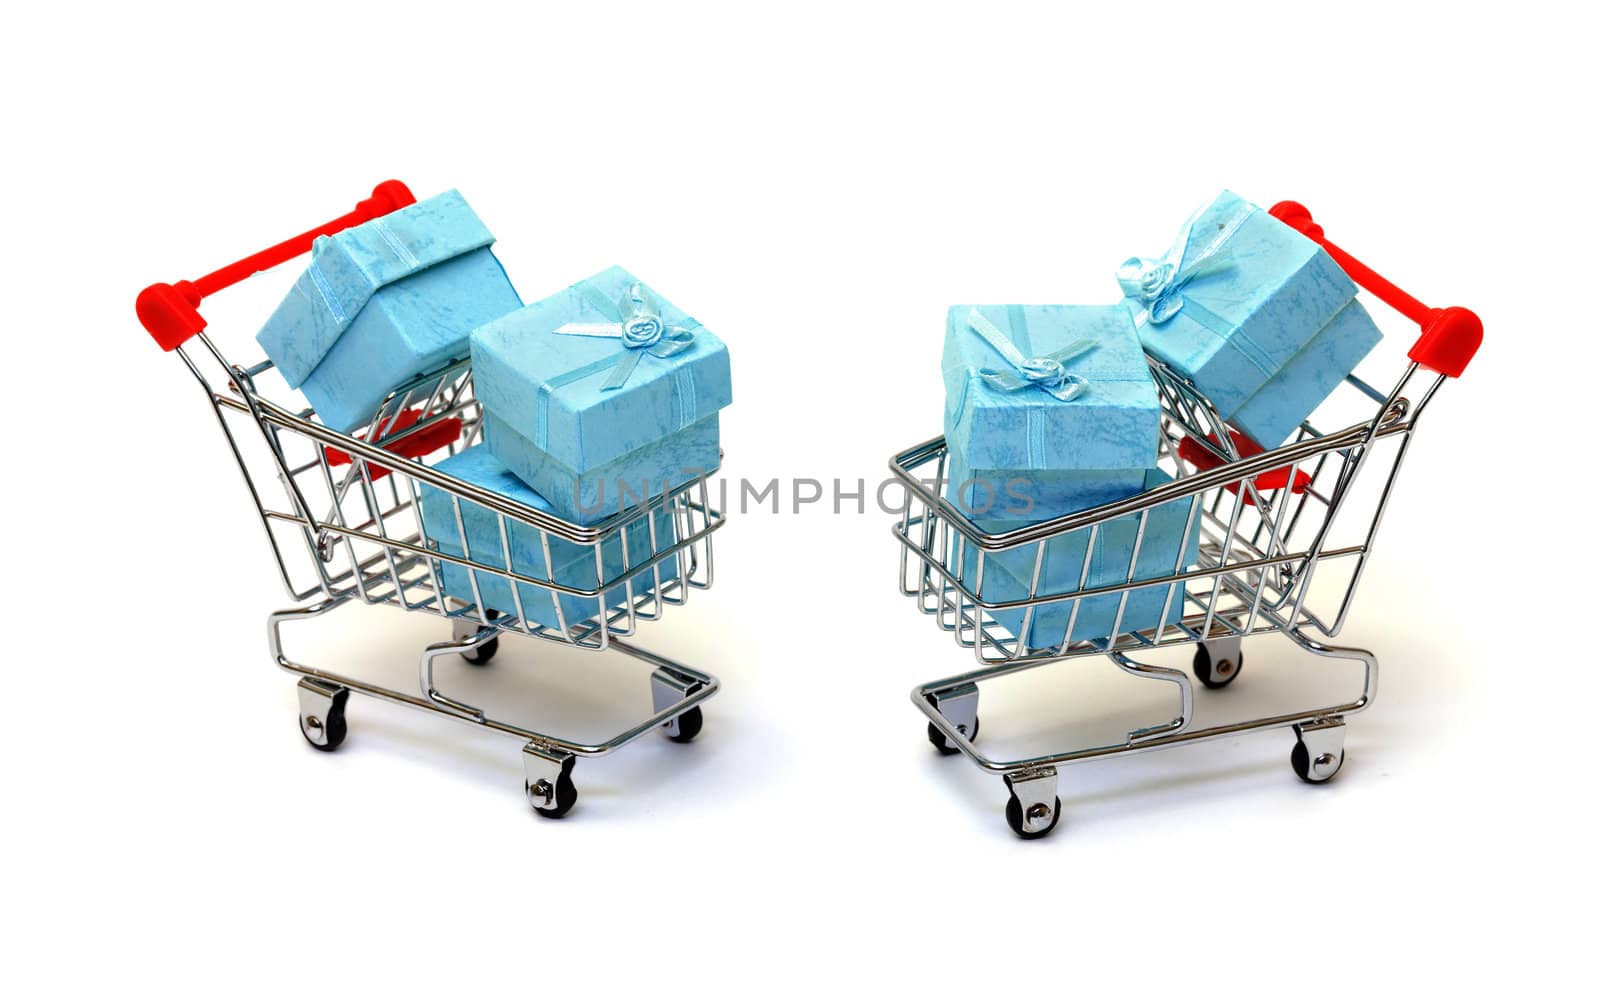 Cyan gift boxes in shopping carts by Discovod